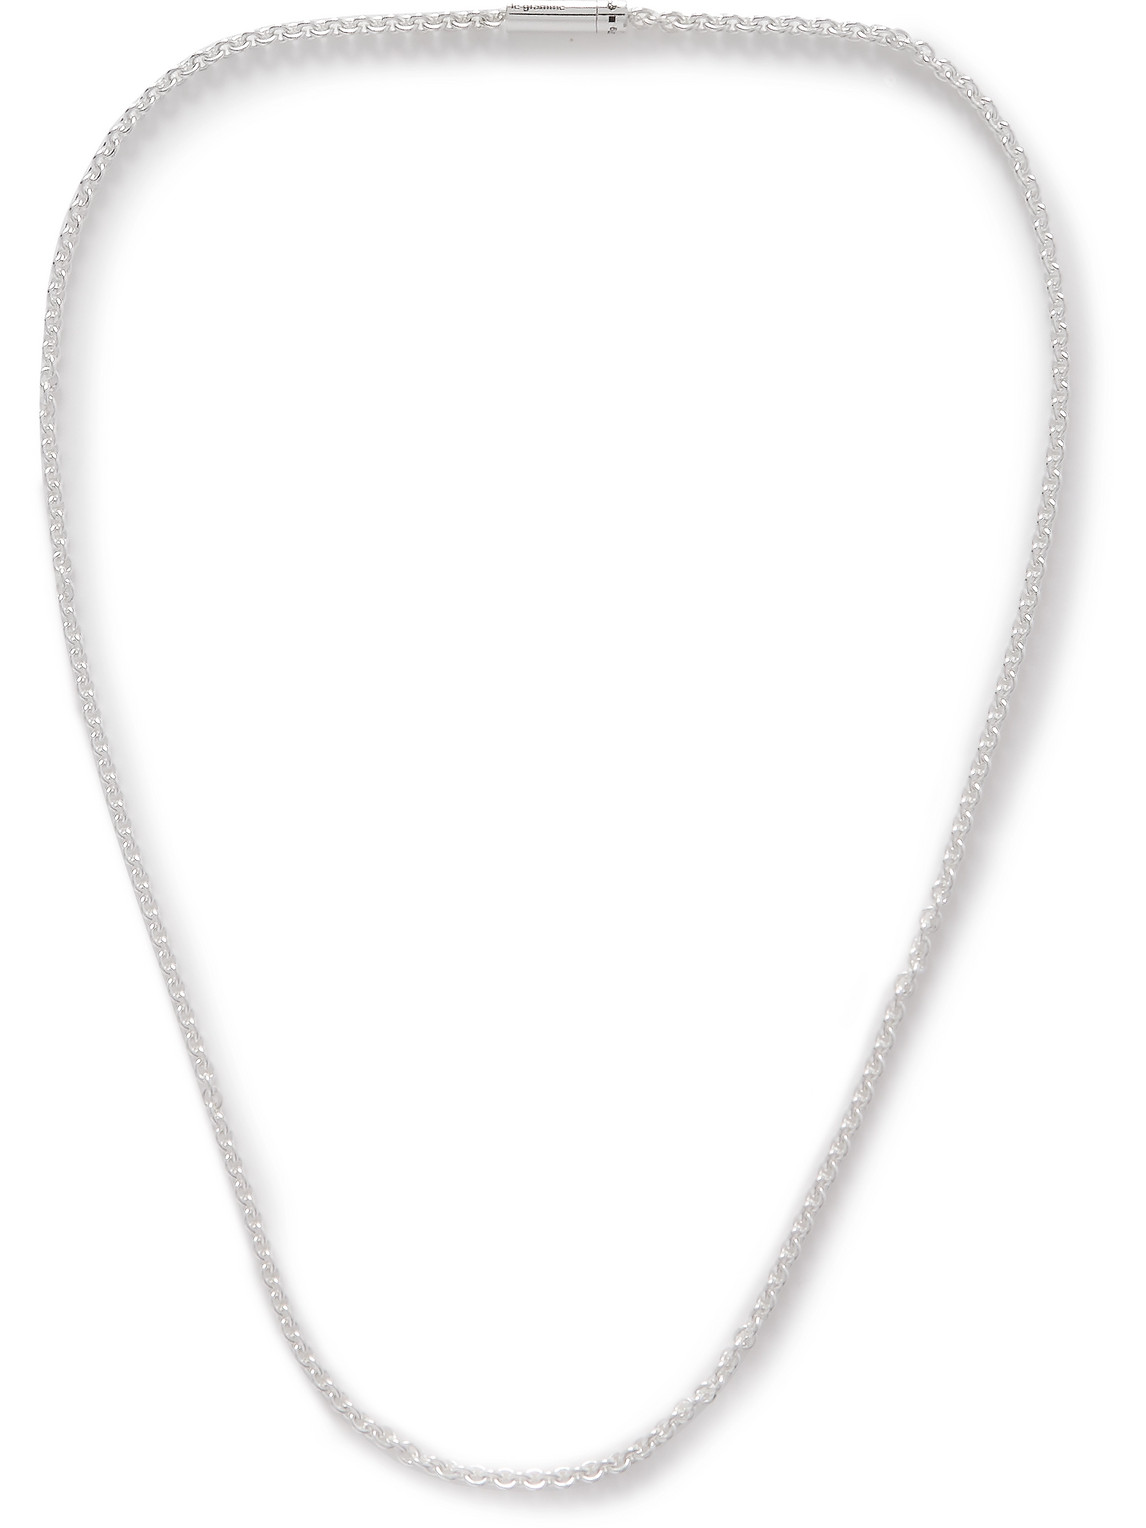 Le Gramme - 27g Recycled Sterling Silver Necklace - Men - Silver von Le Gramme